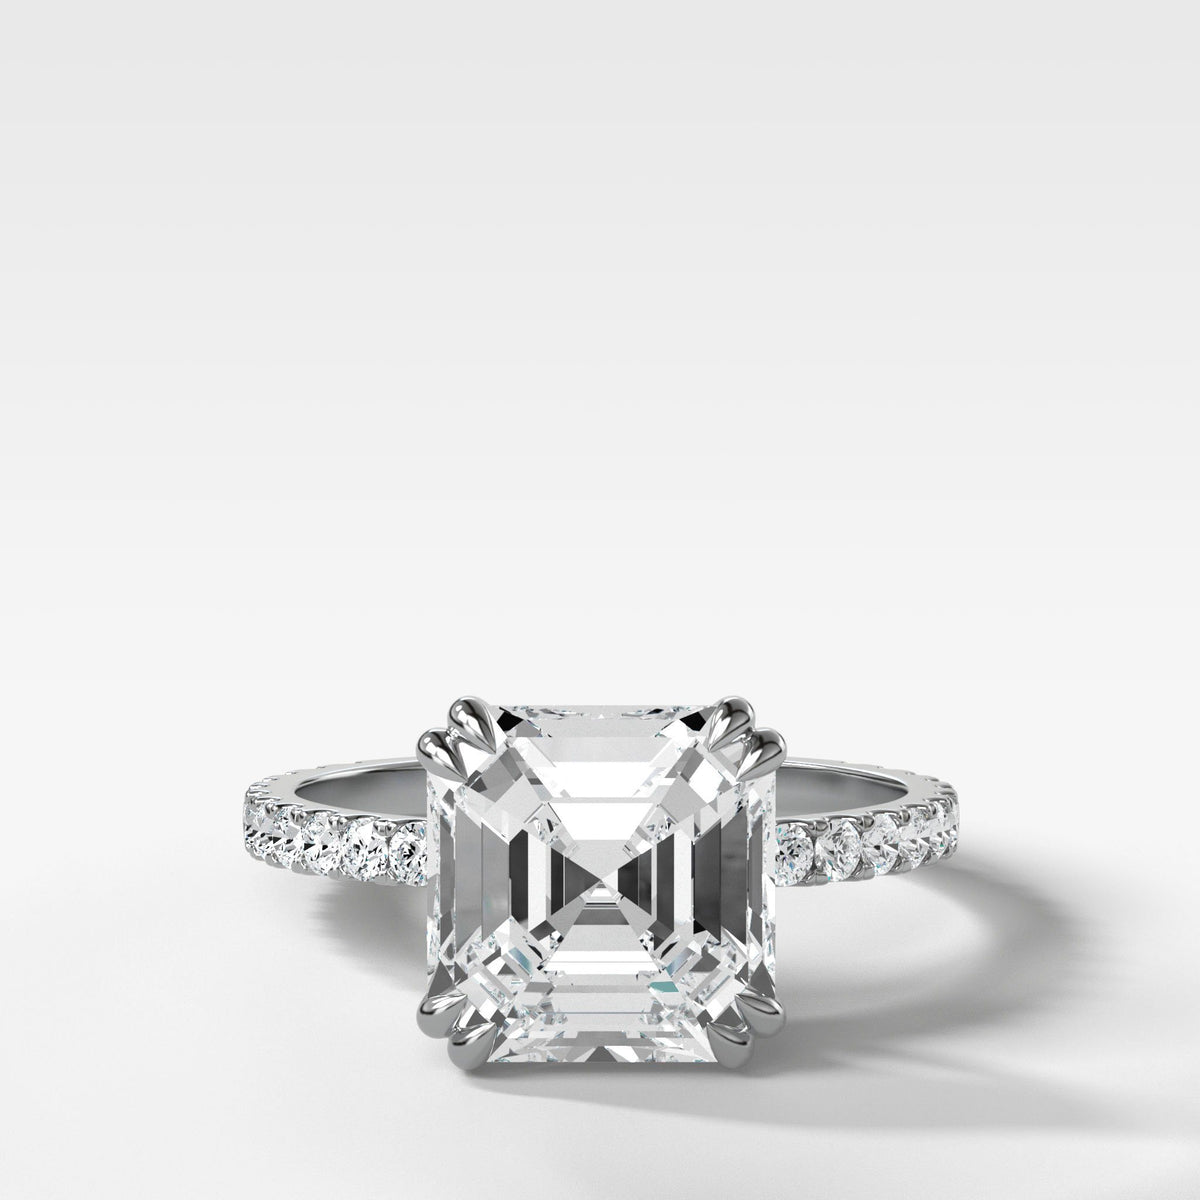 Signature Pave Engagement Ring With Asscher Cut by Good Stone in White Gold